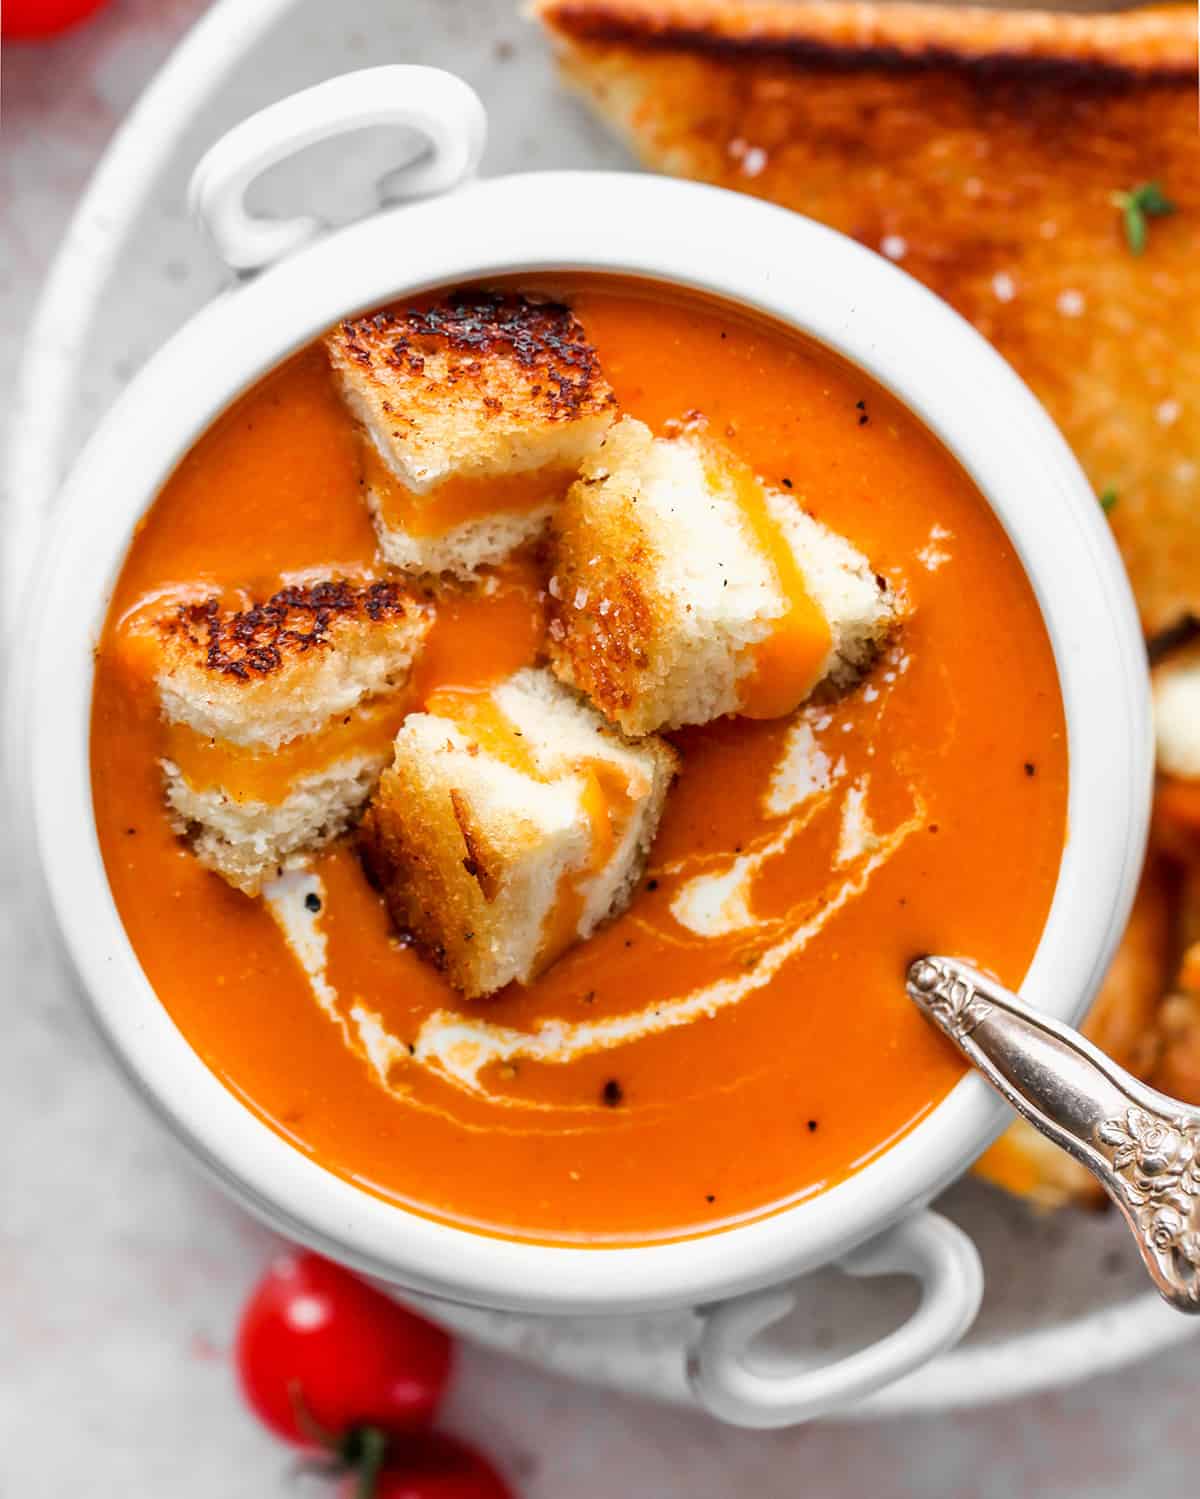 bowl of Homemade Tomato Soup with grilled cheese pieces inside